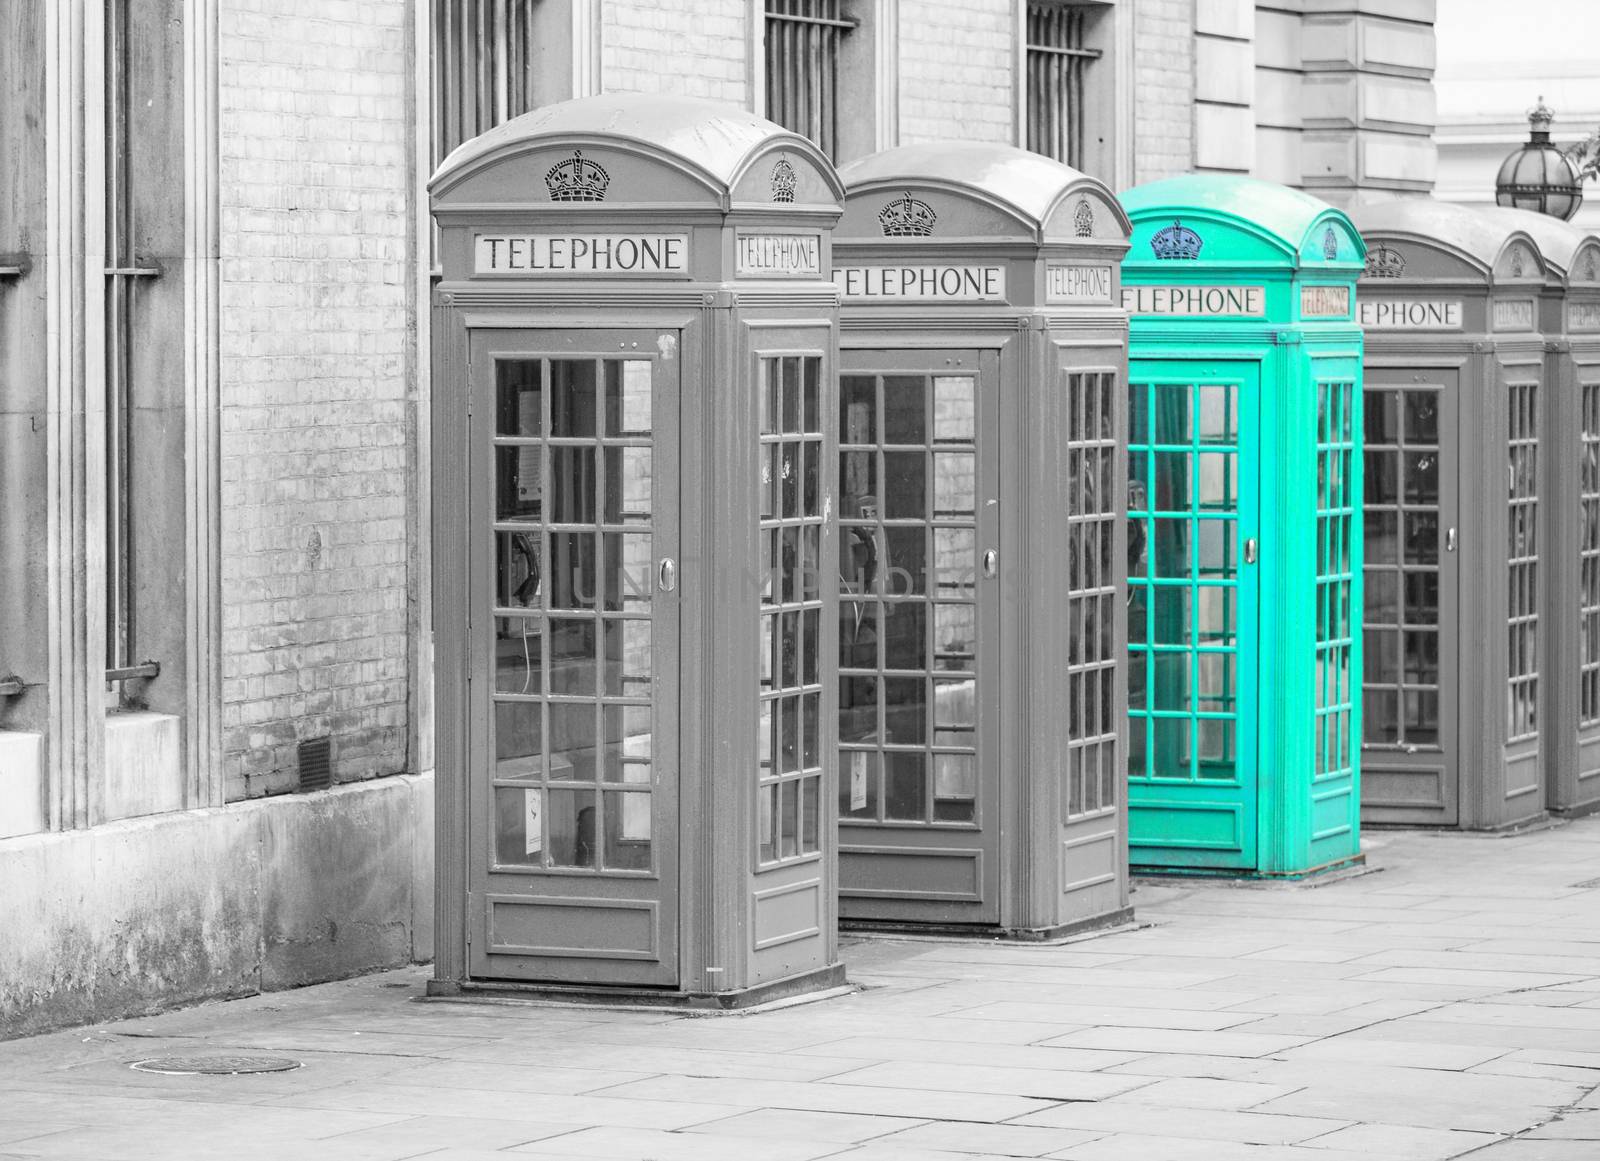 Five Red London Telephone boxes all in a row by chrisukphoto